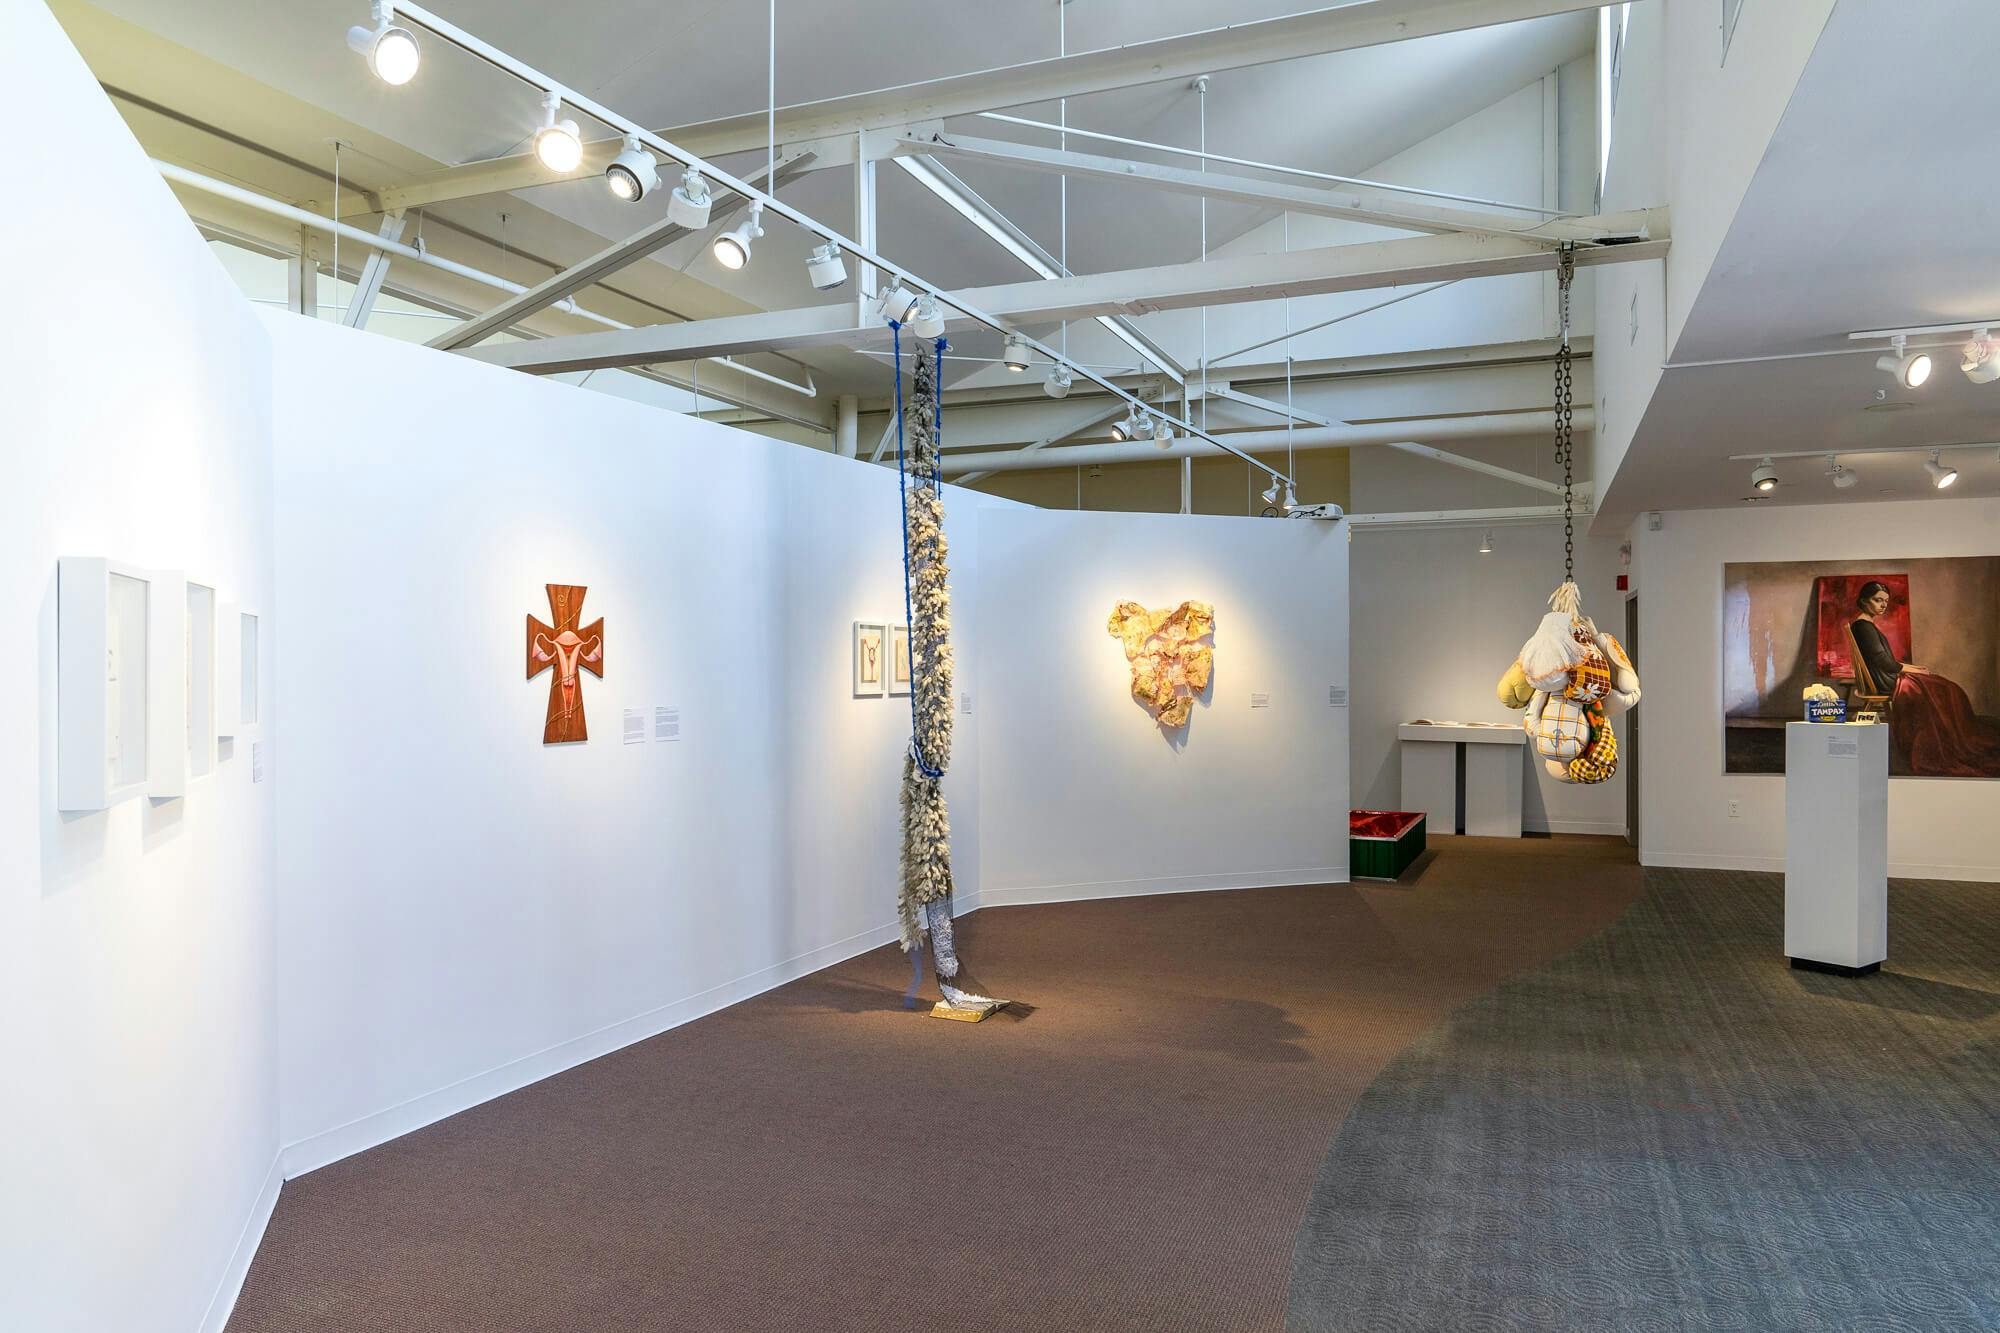 Sculptures linked together by the theme of reproductive justice are suspended from the ceiling.